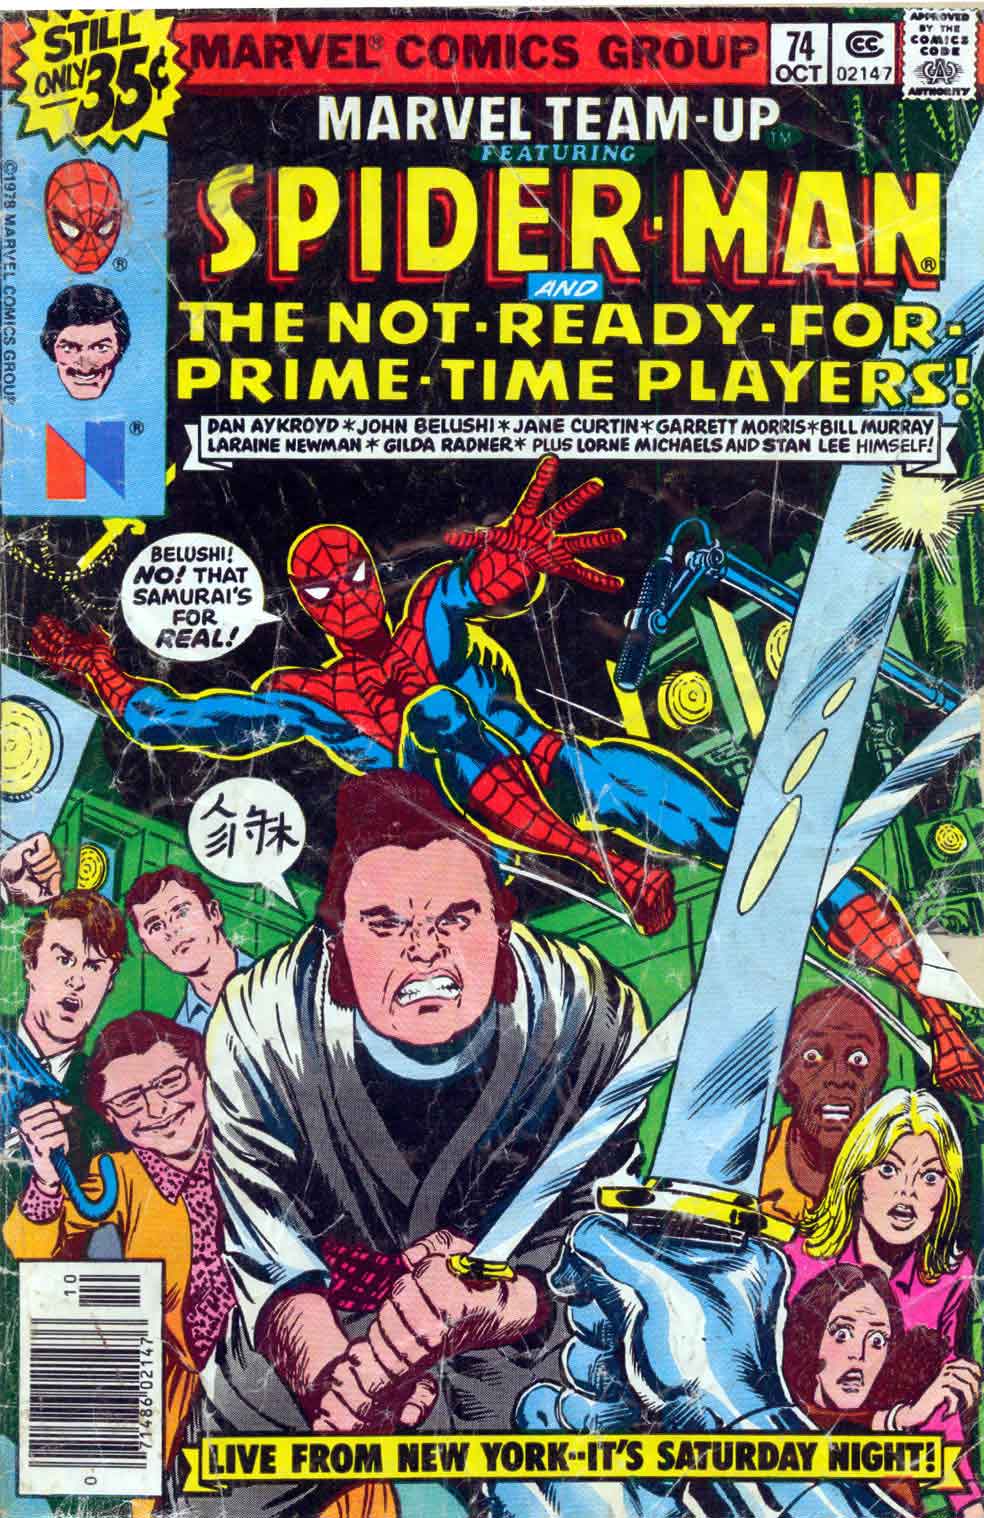 MARVEL TEAM-UP #74 featuring Spider-Man and the cast from Saturday Night Live